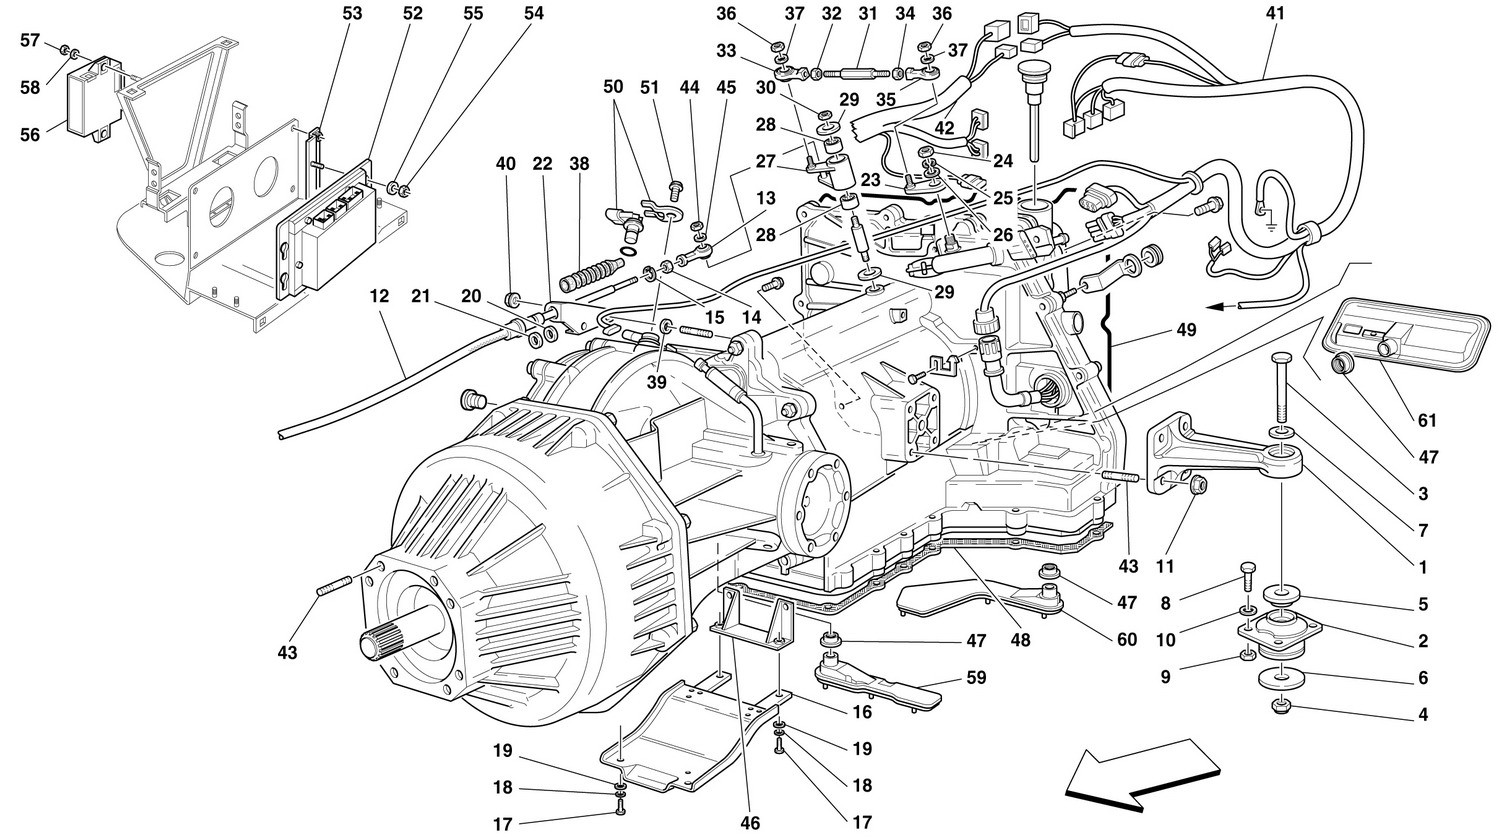 COMPLETE GEARBOX -Valid for 456 GTA-